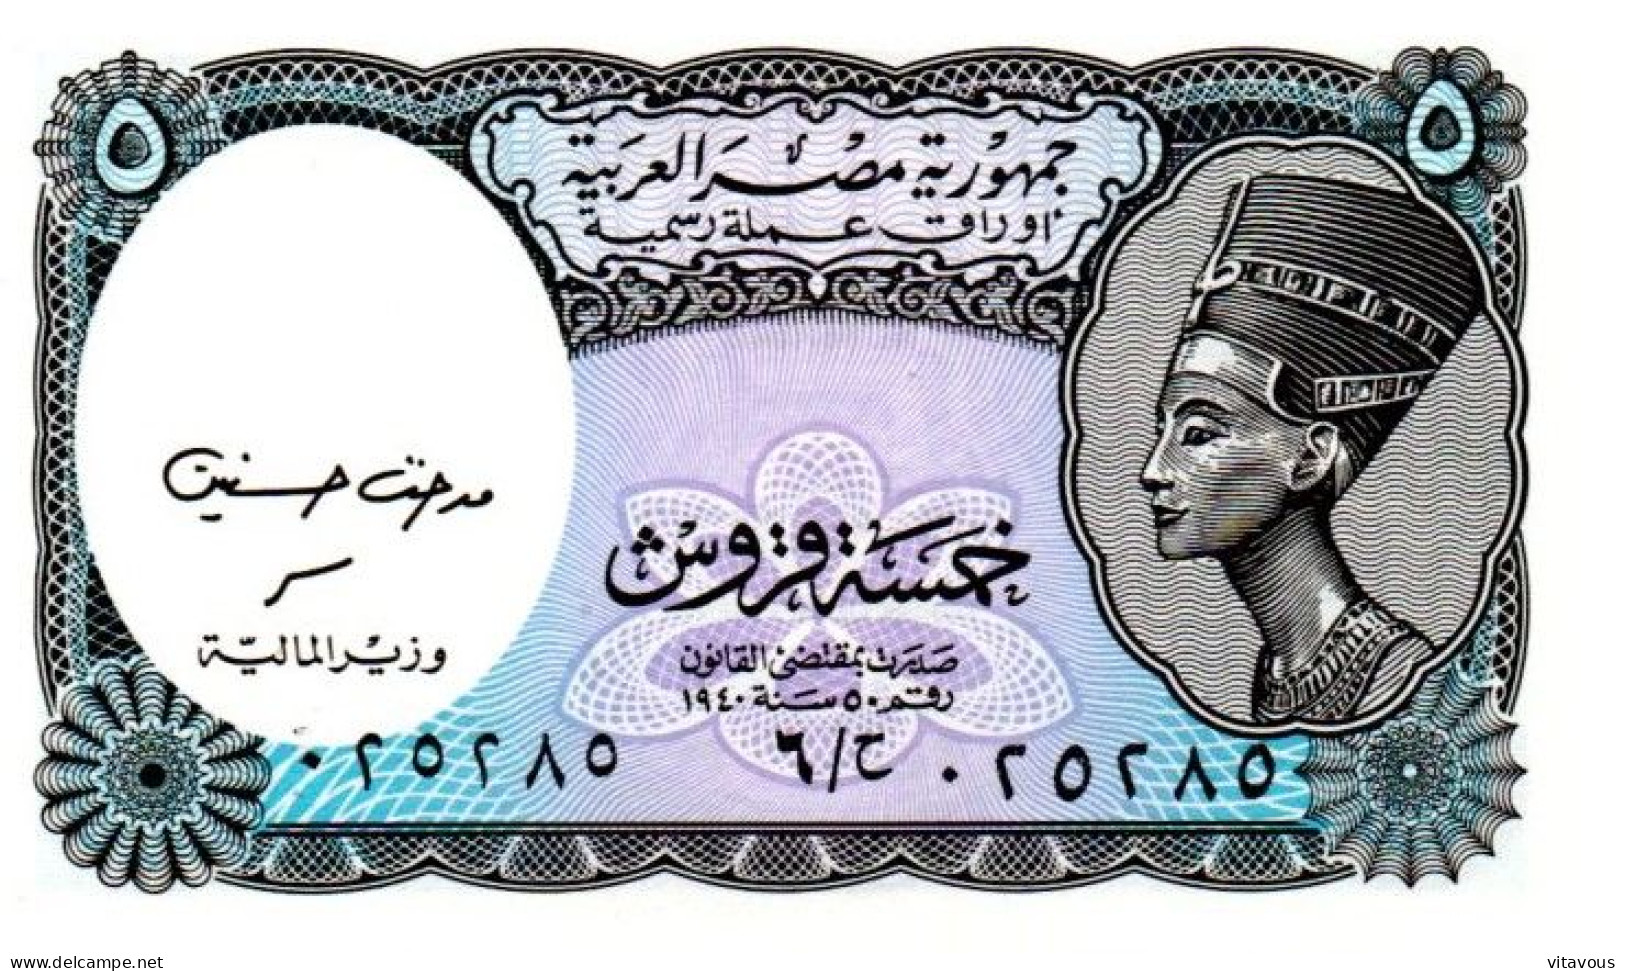 EGYPTE  Billet Banque 5 Piastres  NEUF Bank-note Banknote - Egypt